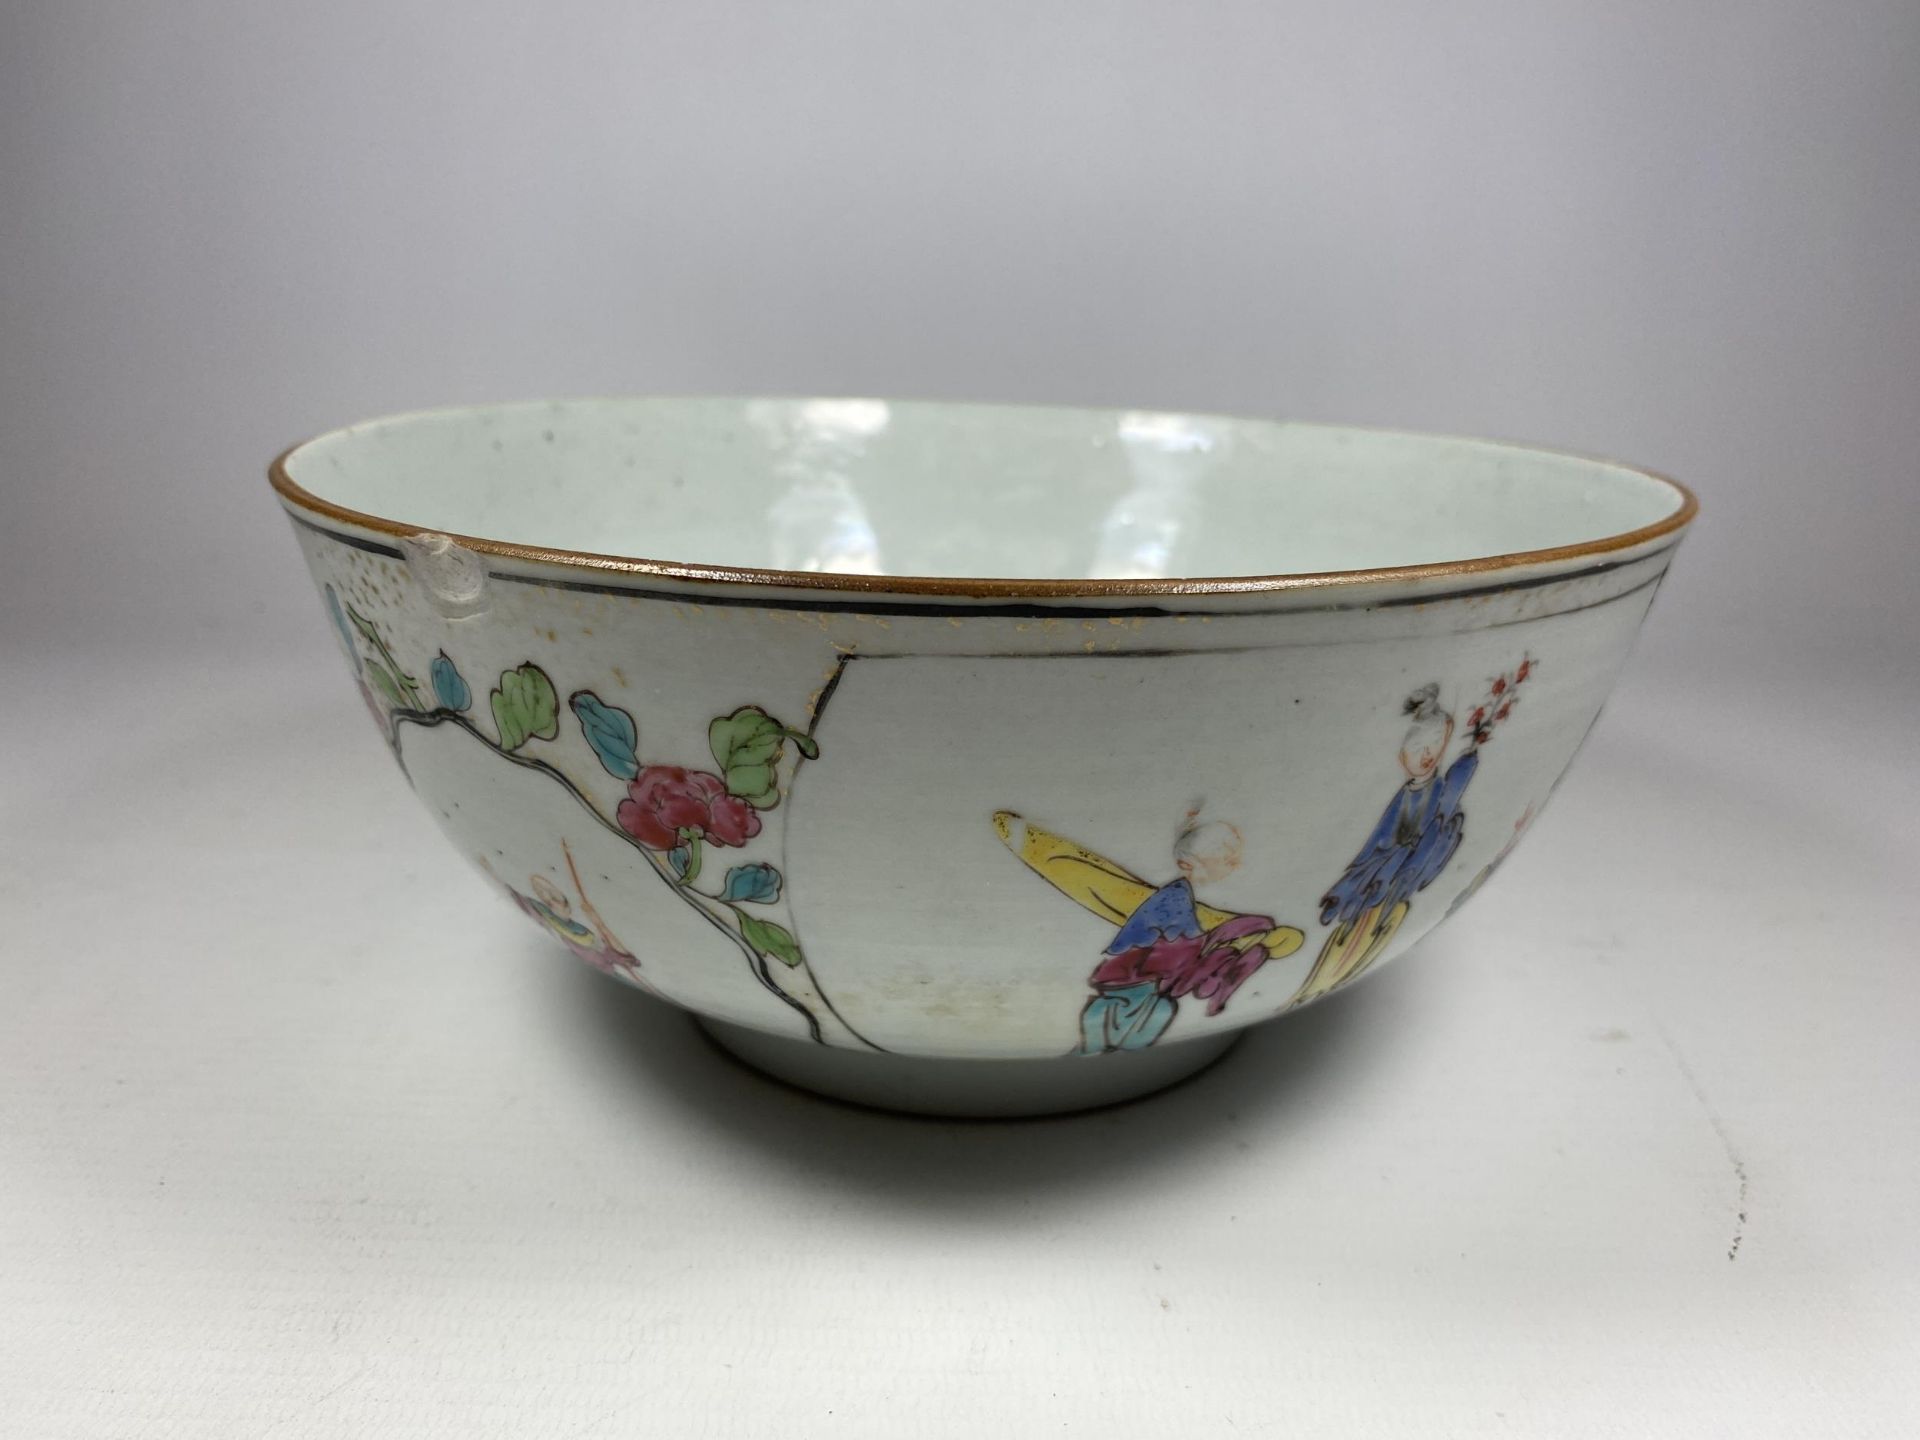 A LATE 18TH / EARLY 19TH CENTURY CHINESE PORCELAIN BOWL WITH ENAMELLED FIGURE DESIGN, DIAMETER 20CM - Image 2 of 8